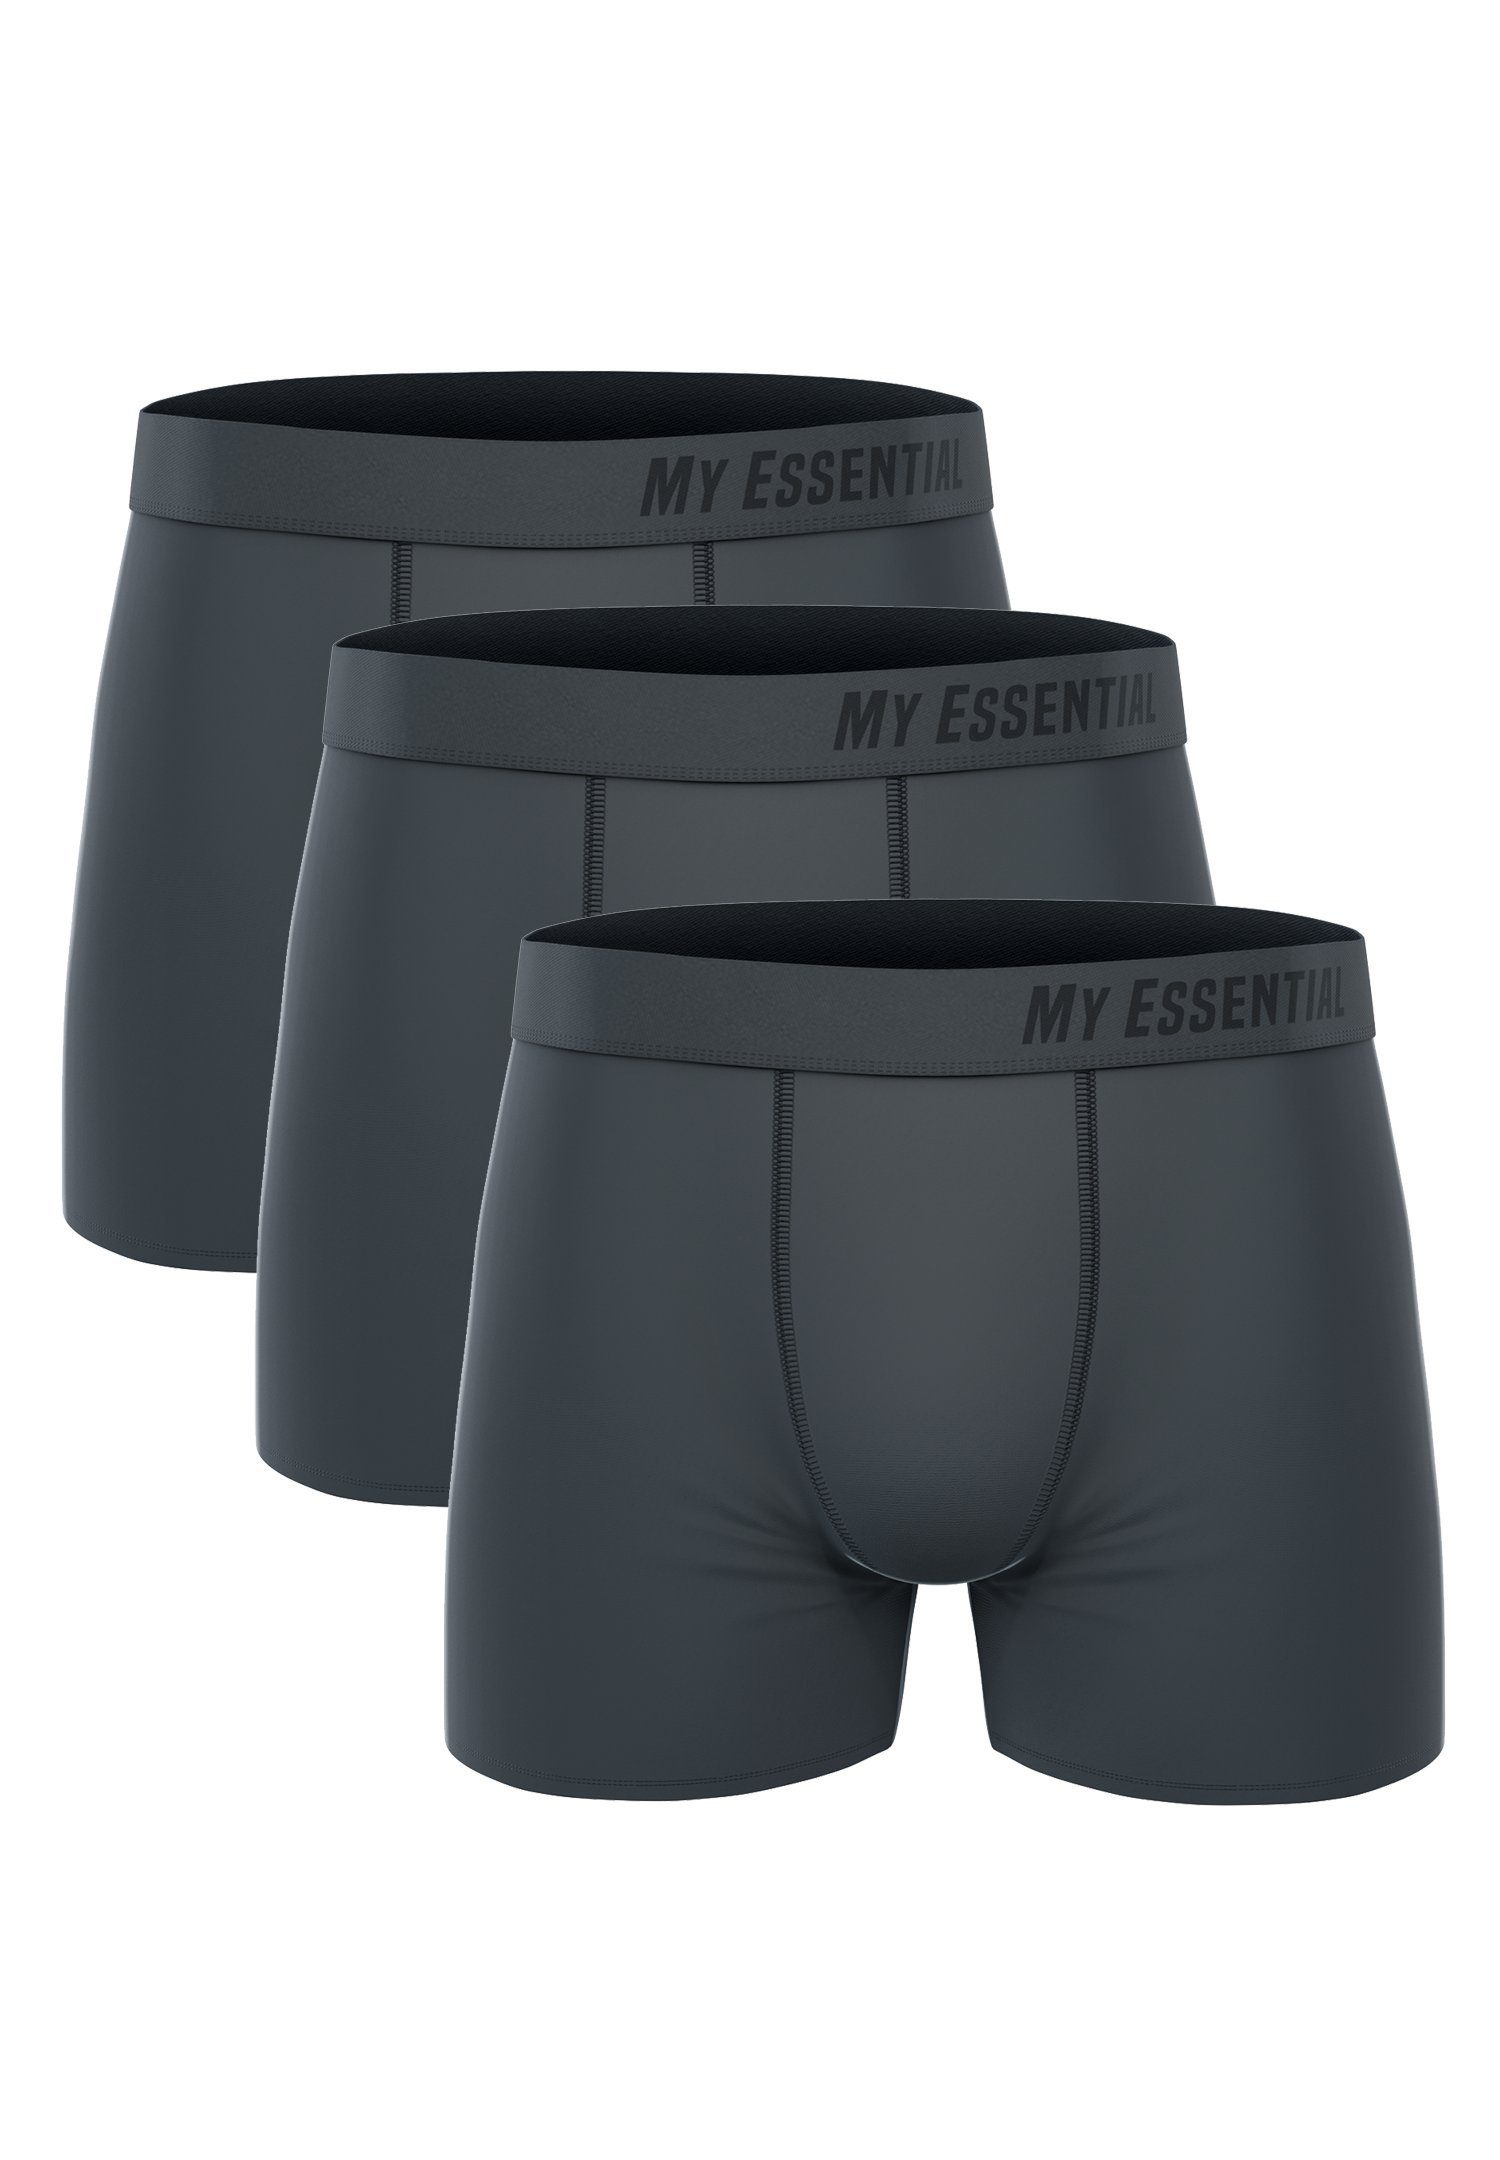 My Essential Clothing Boxershorts My Essential 3 Pack Boxers Cotton Bio (Spar-Pack, 3-St., 3er-Pack) Grey